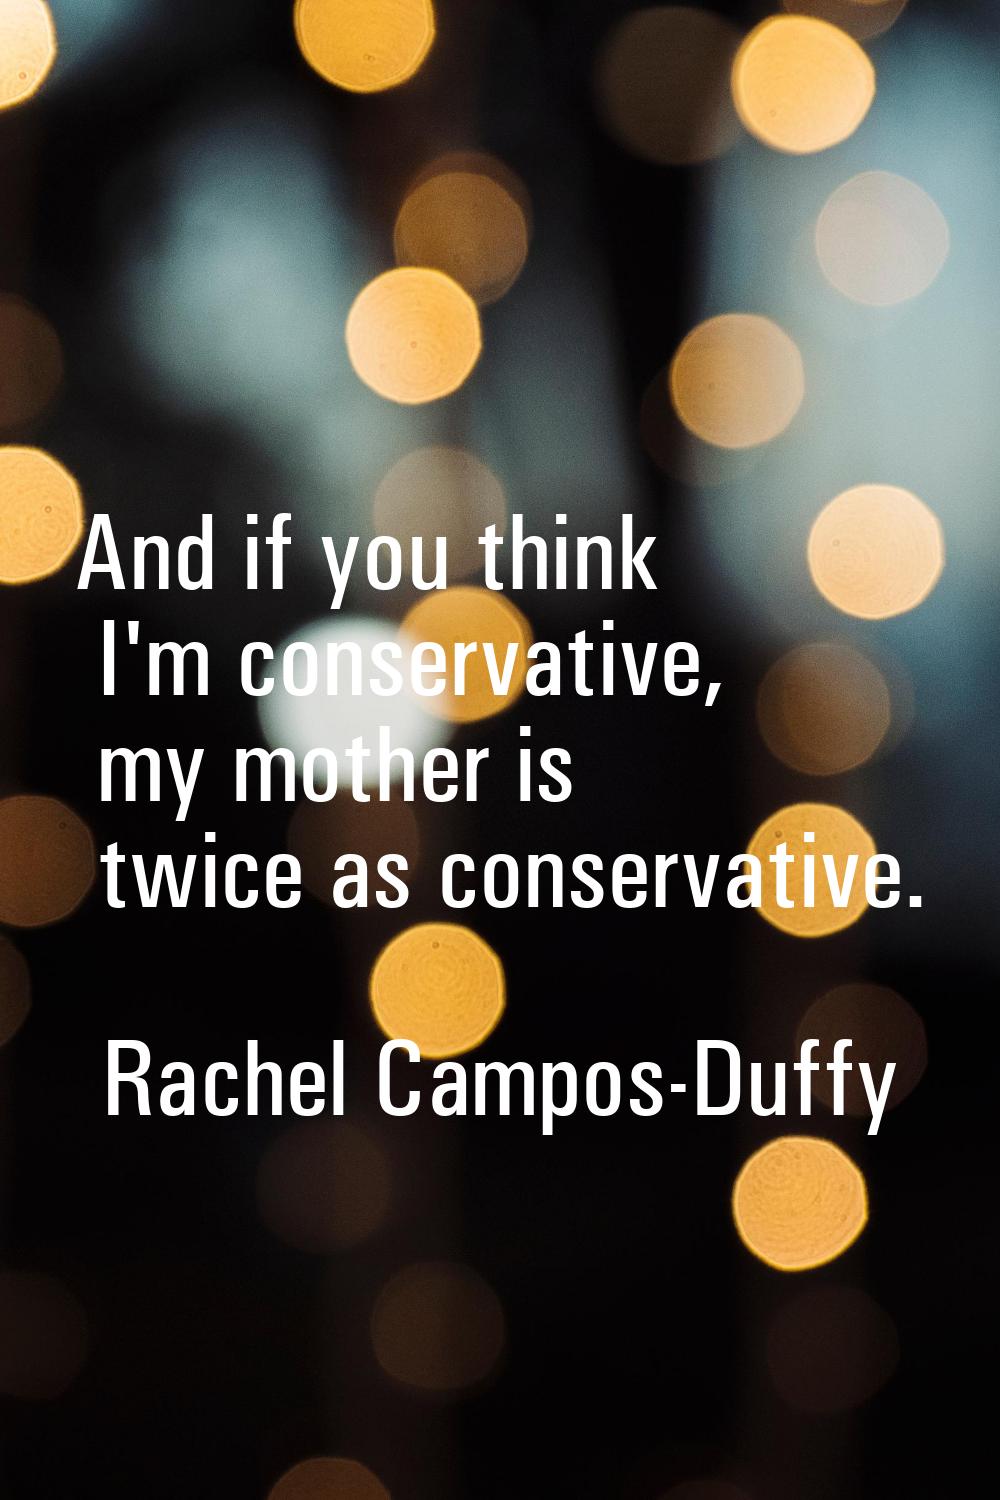 And if you think I'm conservative, my mother is twice as conservative.